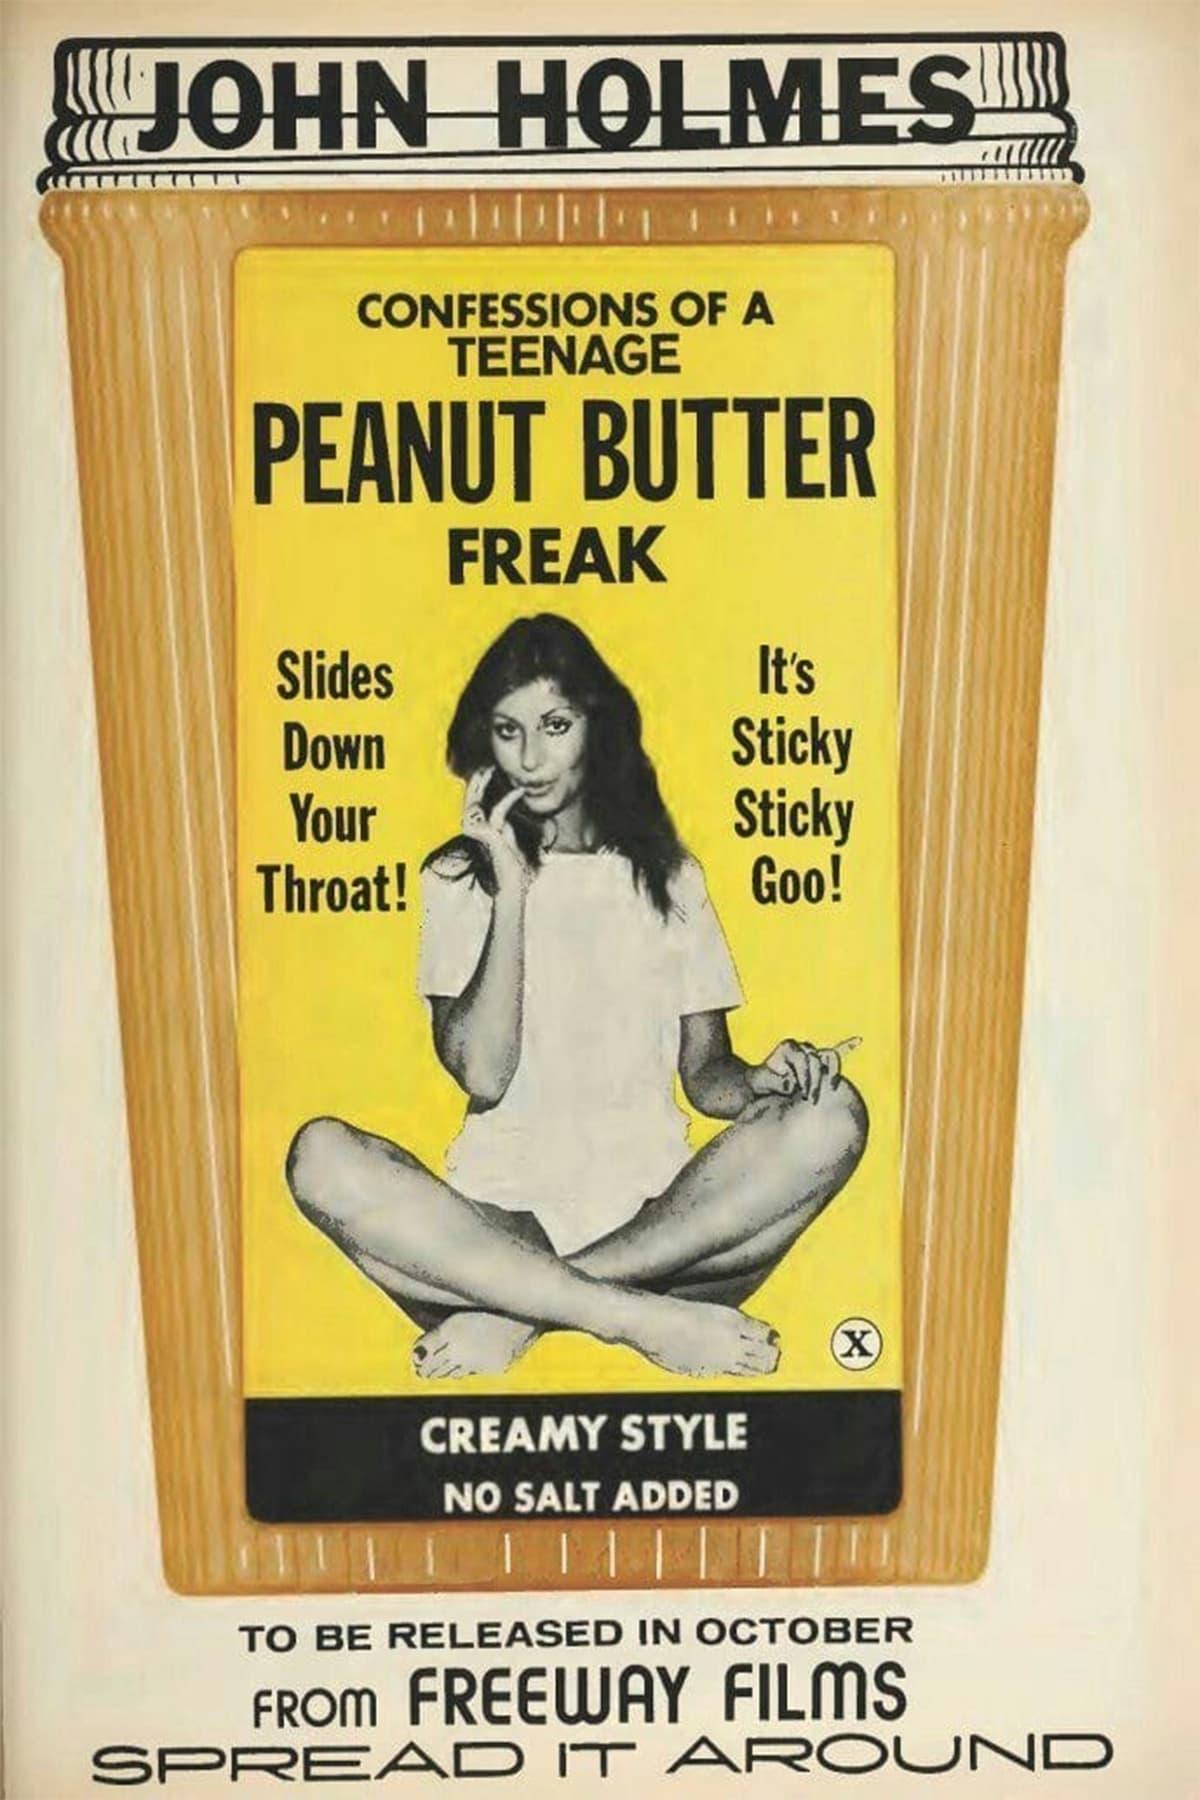 Confessions of a Teenage Peanut Butter Freak poster